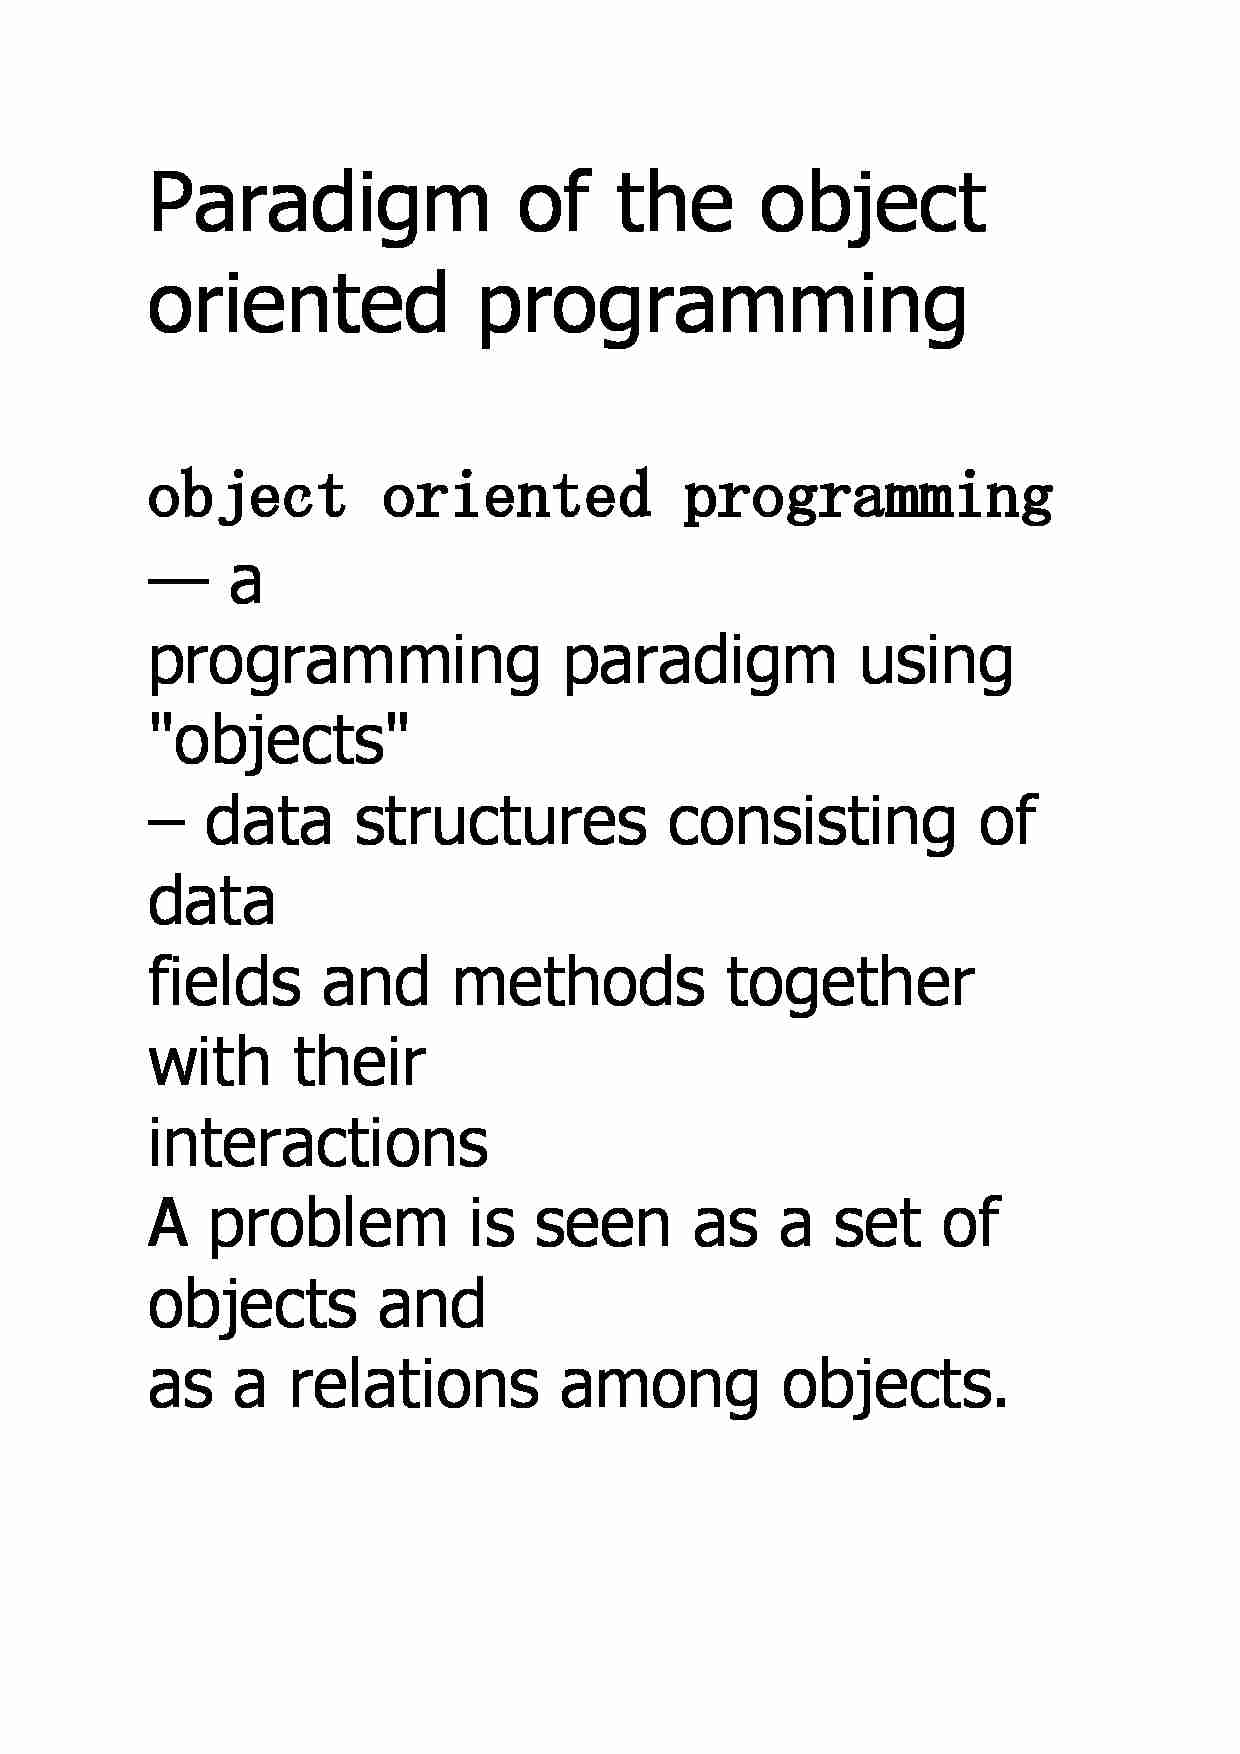 Paradigm of the object oriented programming - strona 1